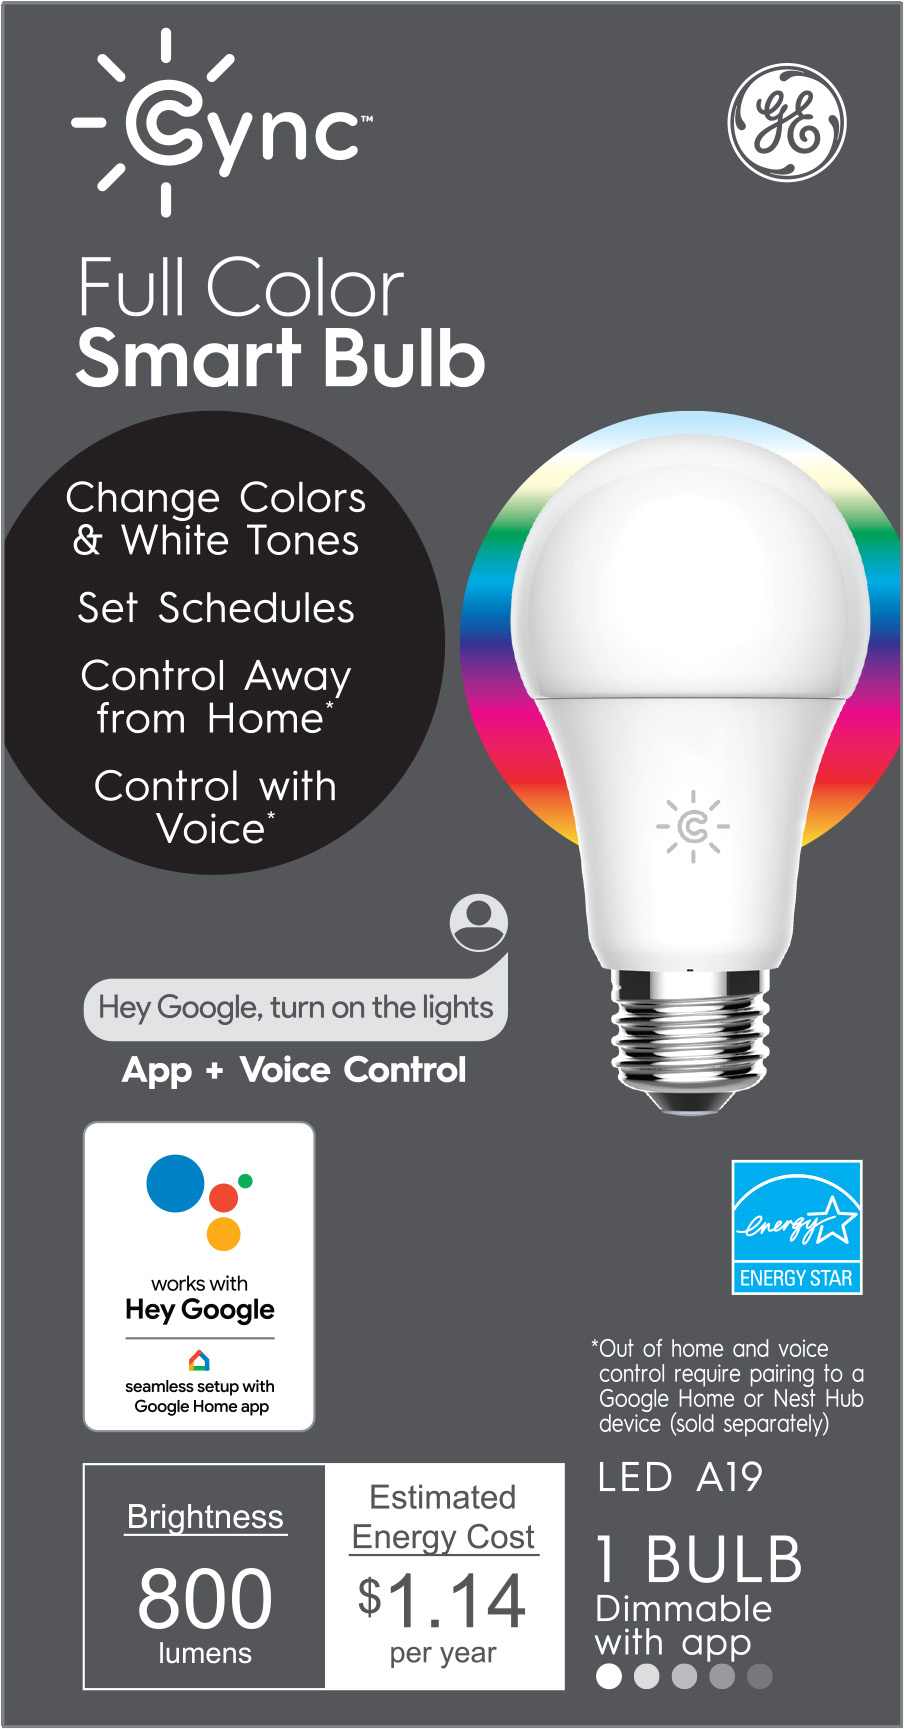 GE CYNC Smart Light Bulb, Full Color, App and Voice Control, Works with Google, 1pk - image 1 of 7